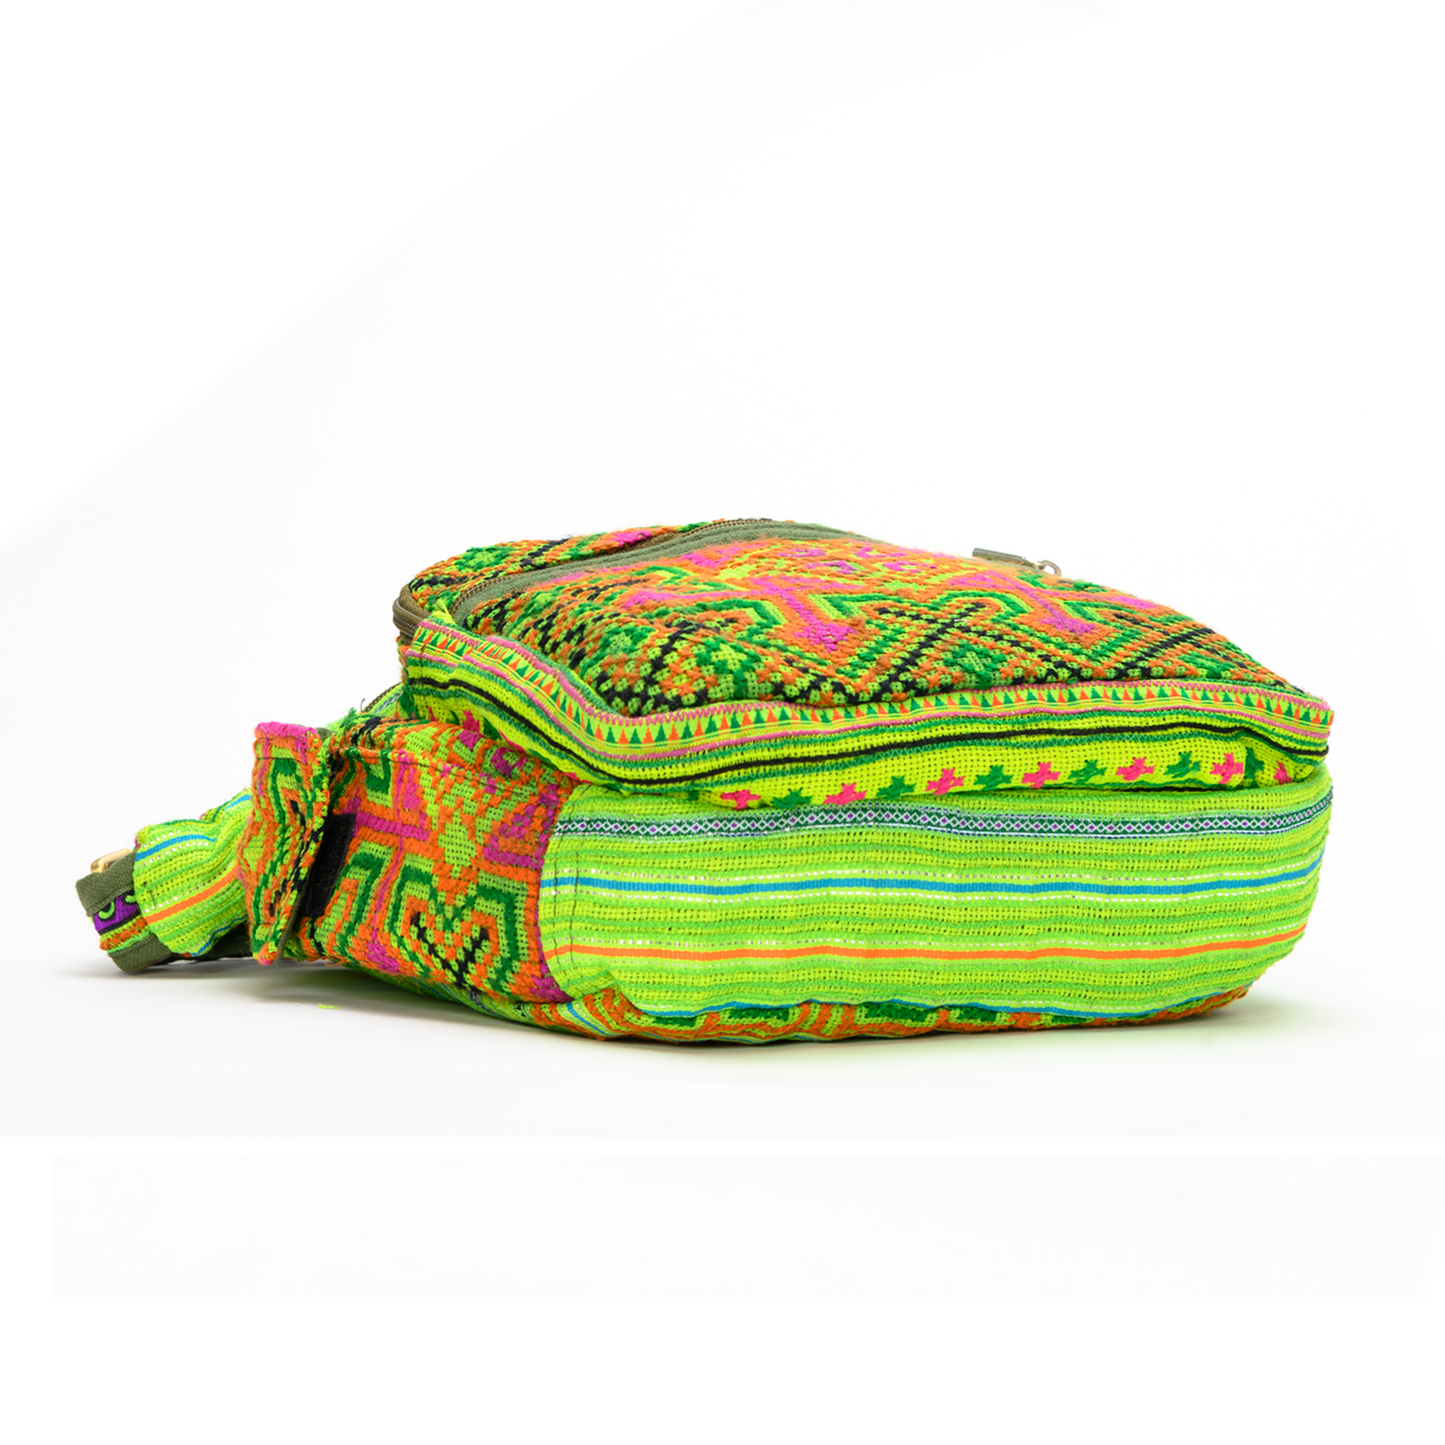 Boho-style linen, embroidery cross-body bag, H'mong tribal pattern in Neon GREEN